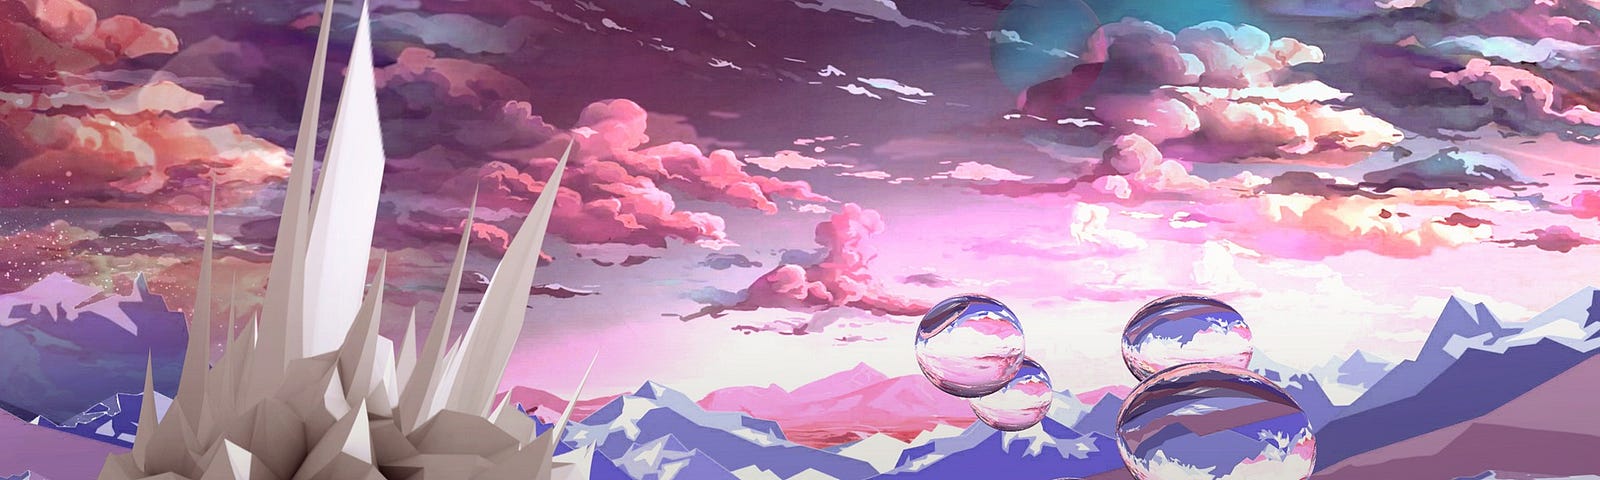 rendering of a pink and purple world with pointed icebergs and reflective bubbles floating in the sky